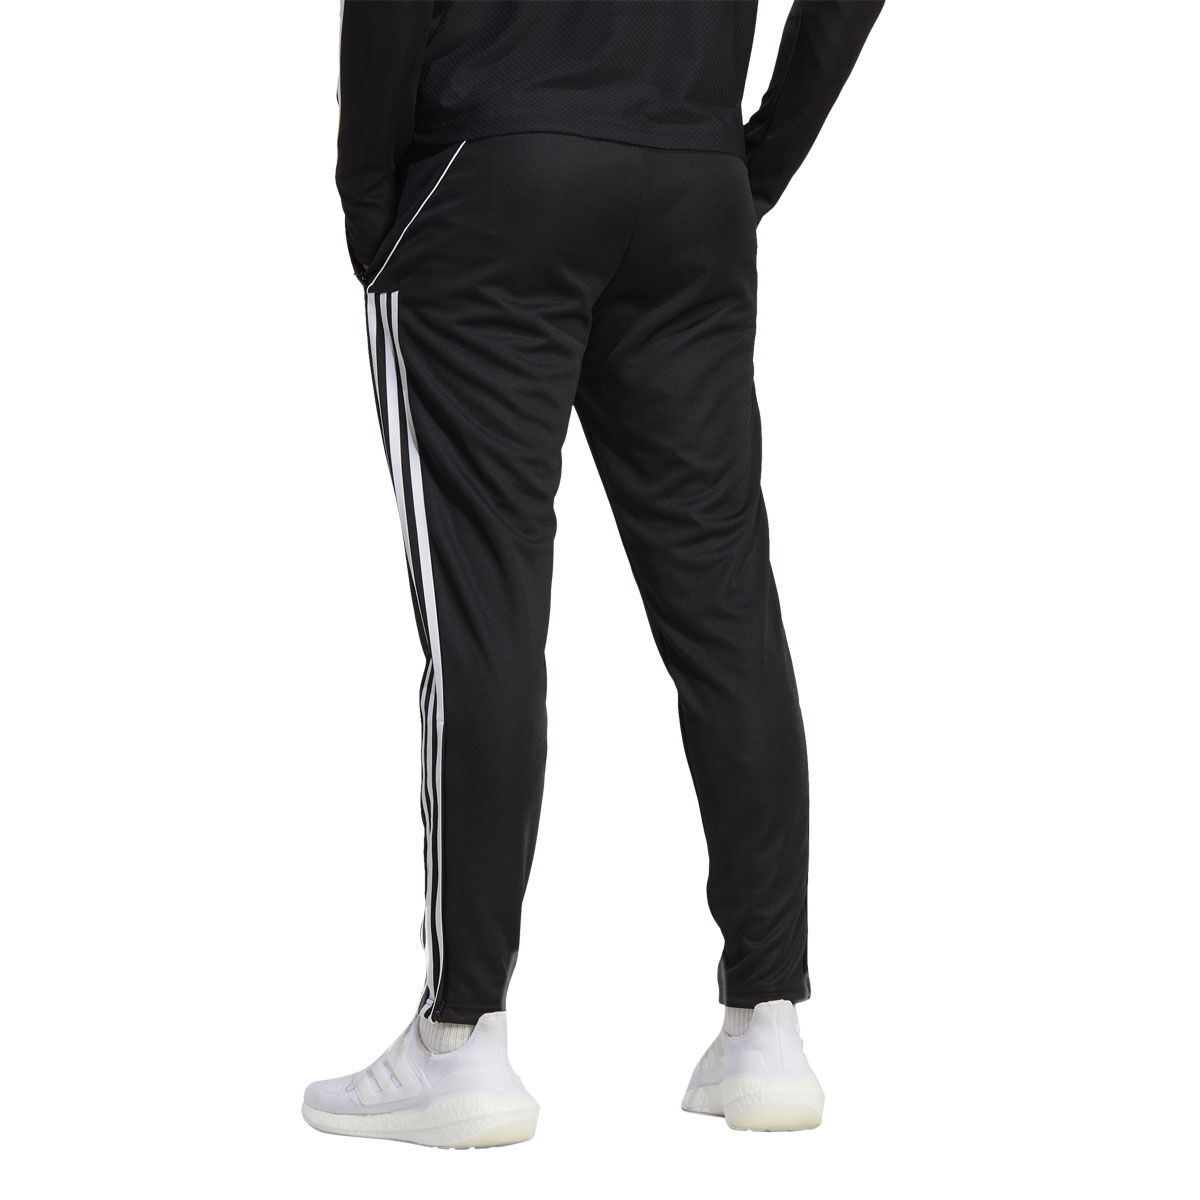 Black, 2XL) shelikes Mens Trousers Fleece Open Hem Bottoms Track Pants  Casual Jogging Joggers with Zip Pockets on OnBuy